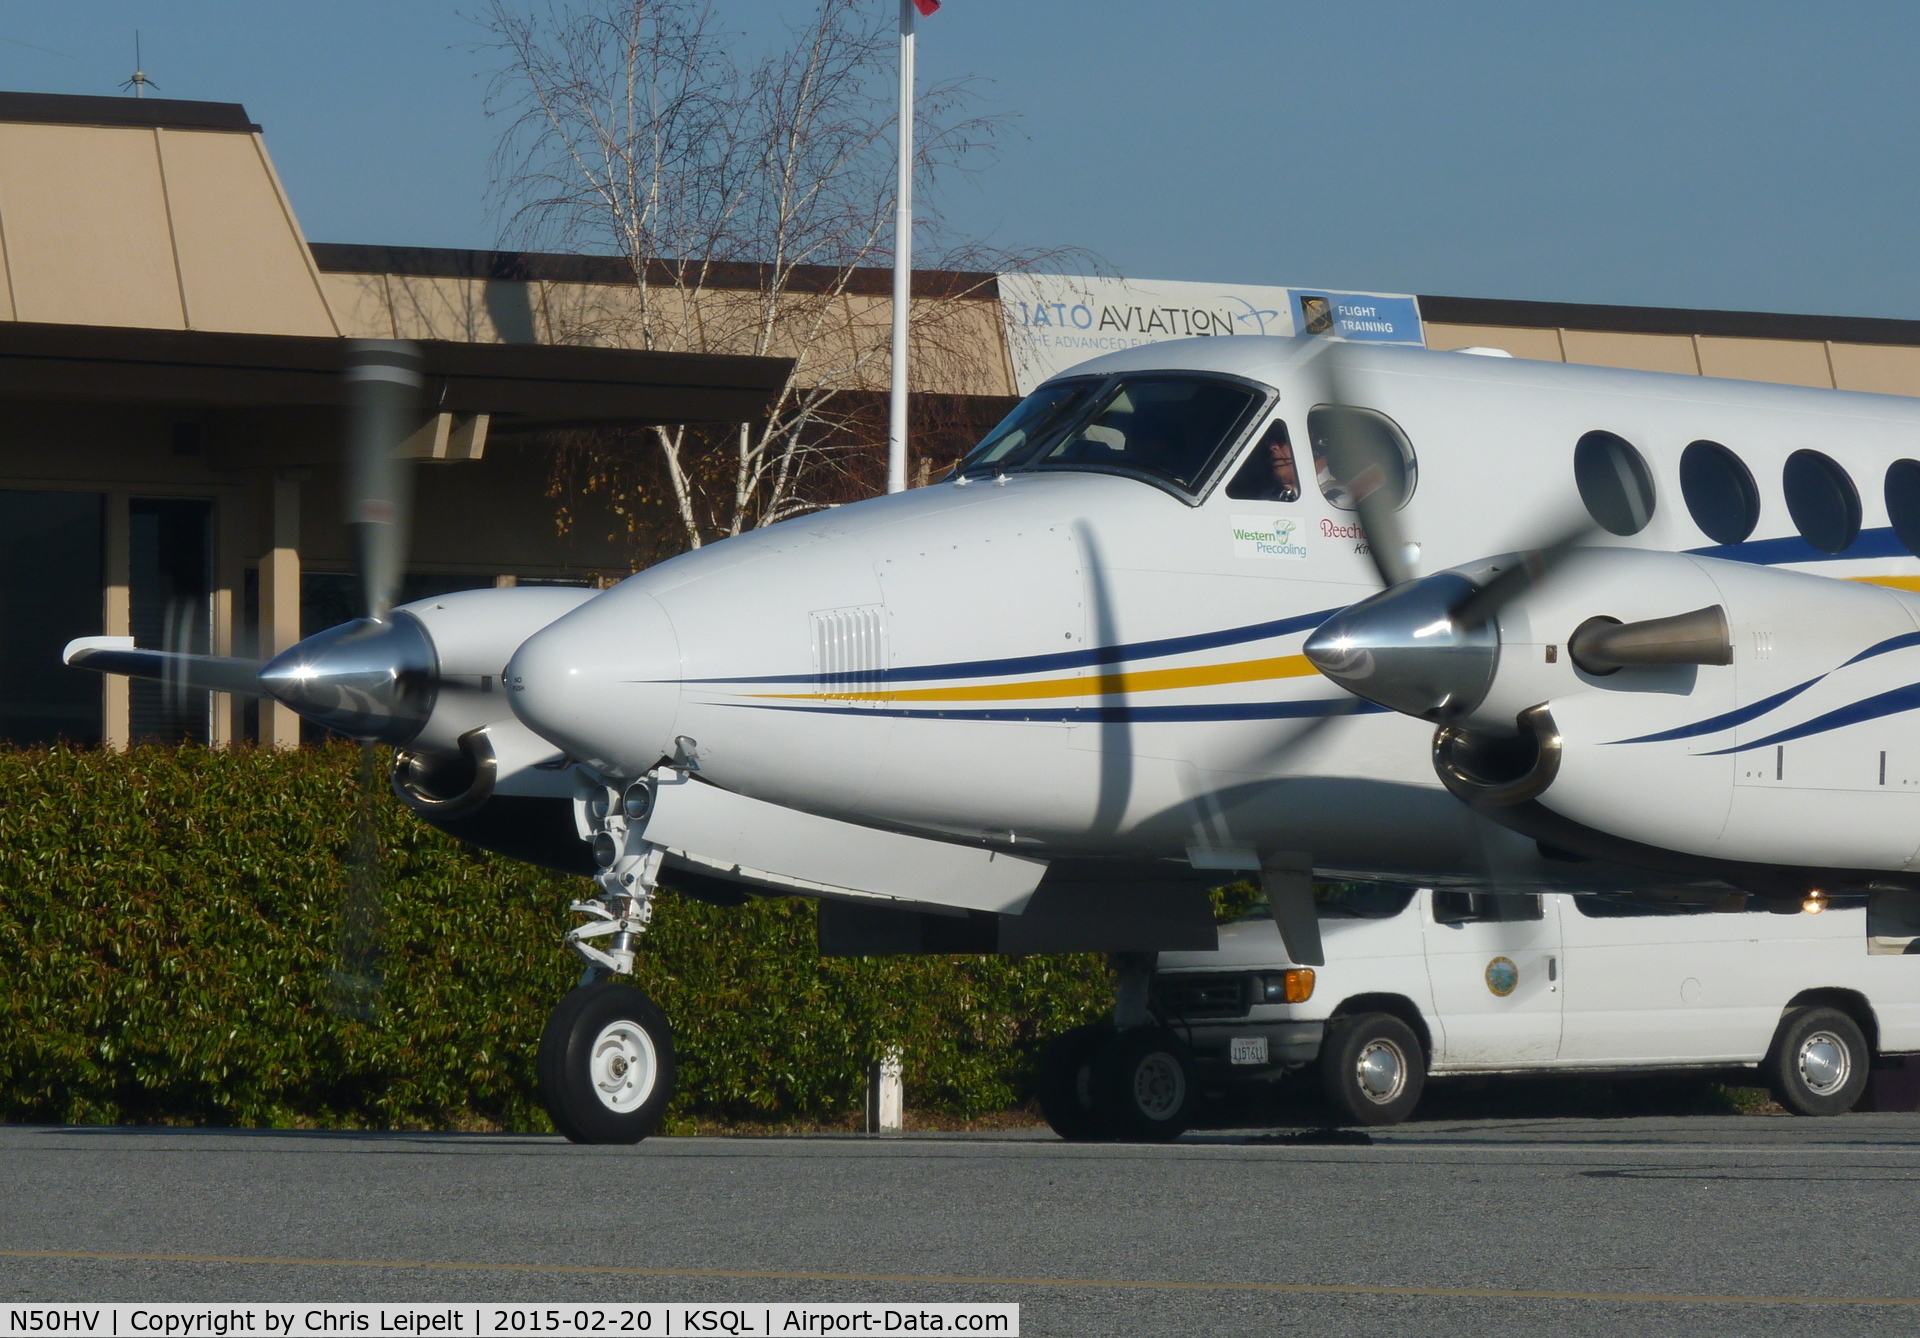 N50HV, 2004 Raytheon B200 Super King Air C/N BB-1879, A 1981 Beechcraft King Air 200 from Hayward, CA taxing out of San Carlos Airport, CA after dropping off some passengers.